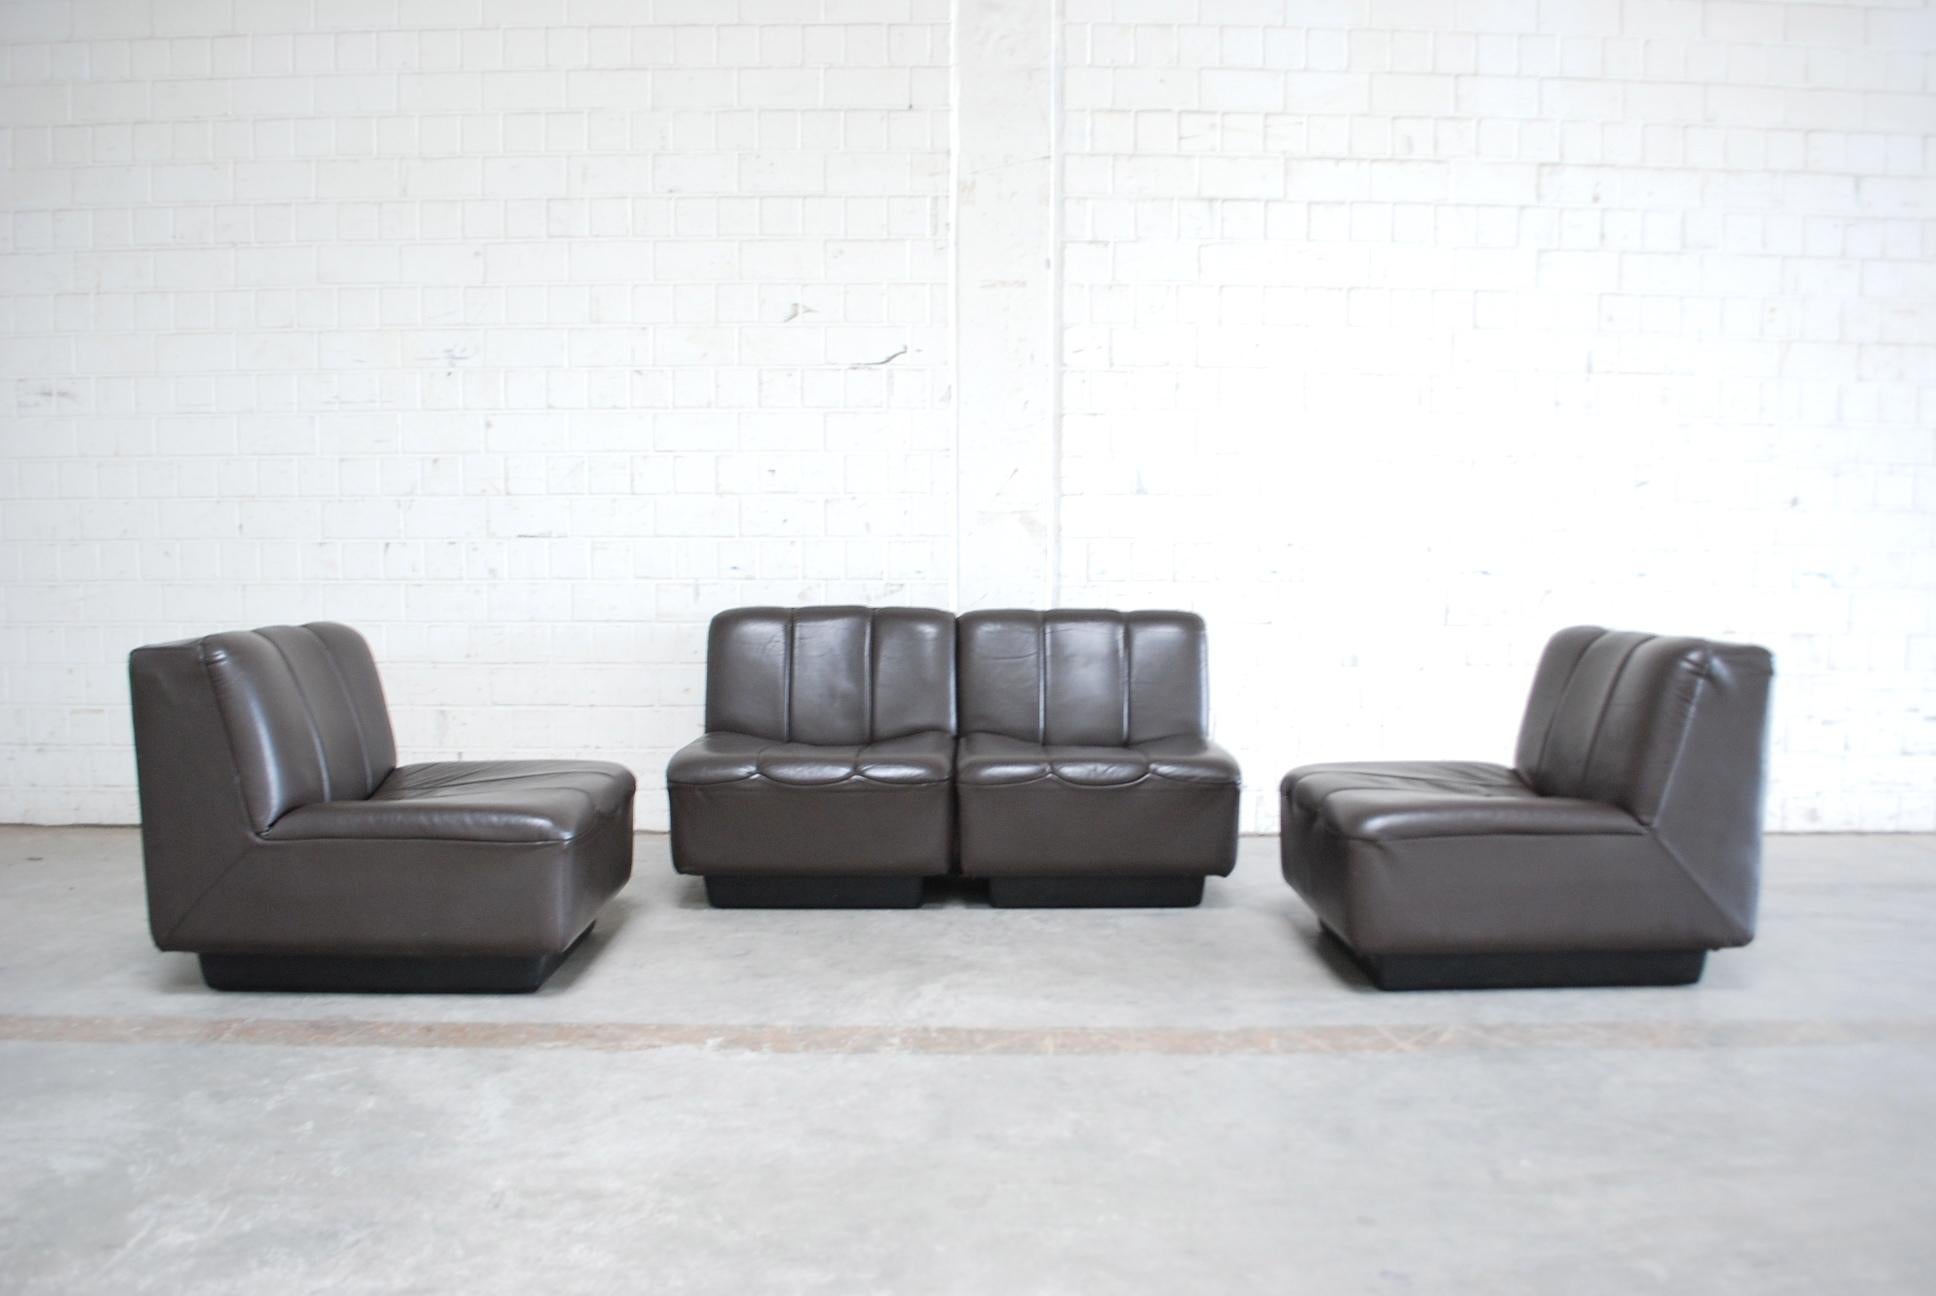 Vintage design leather sofa from Germany 1970.
Brown semianiline leather.
The frame is made of thick plastic.
It consists 4 single elements that can arrange in different positions or as 4 single chairs.

 